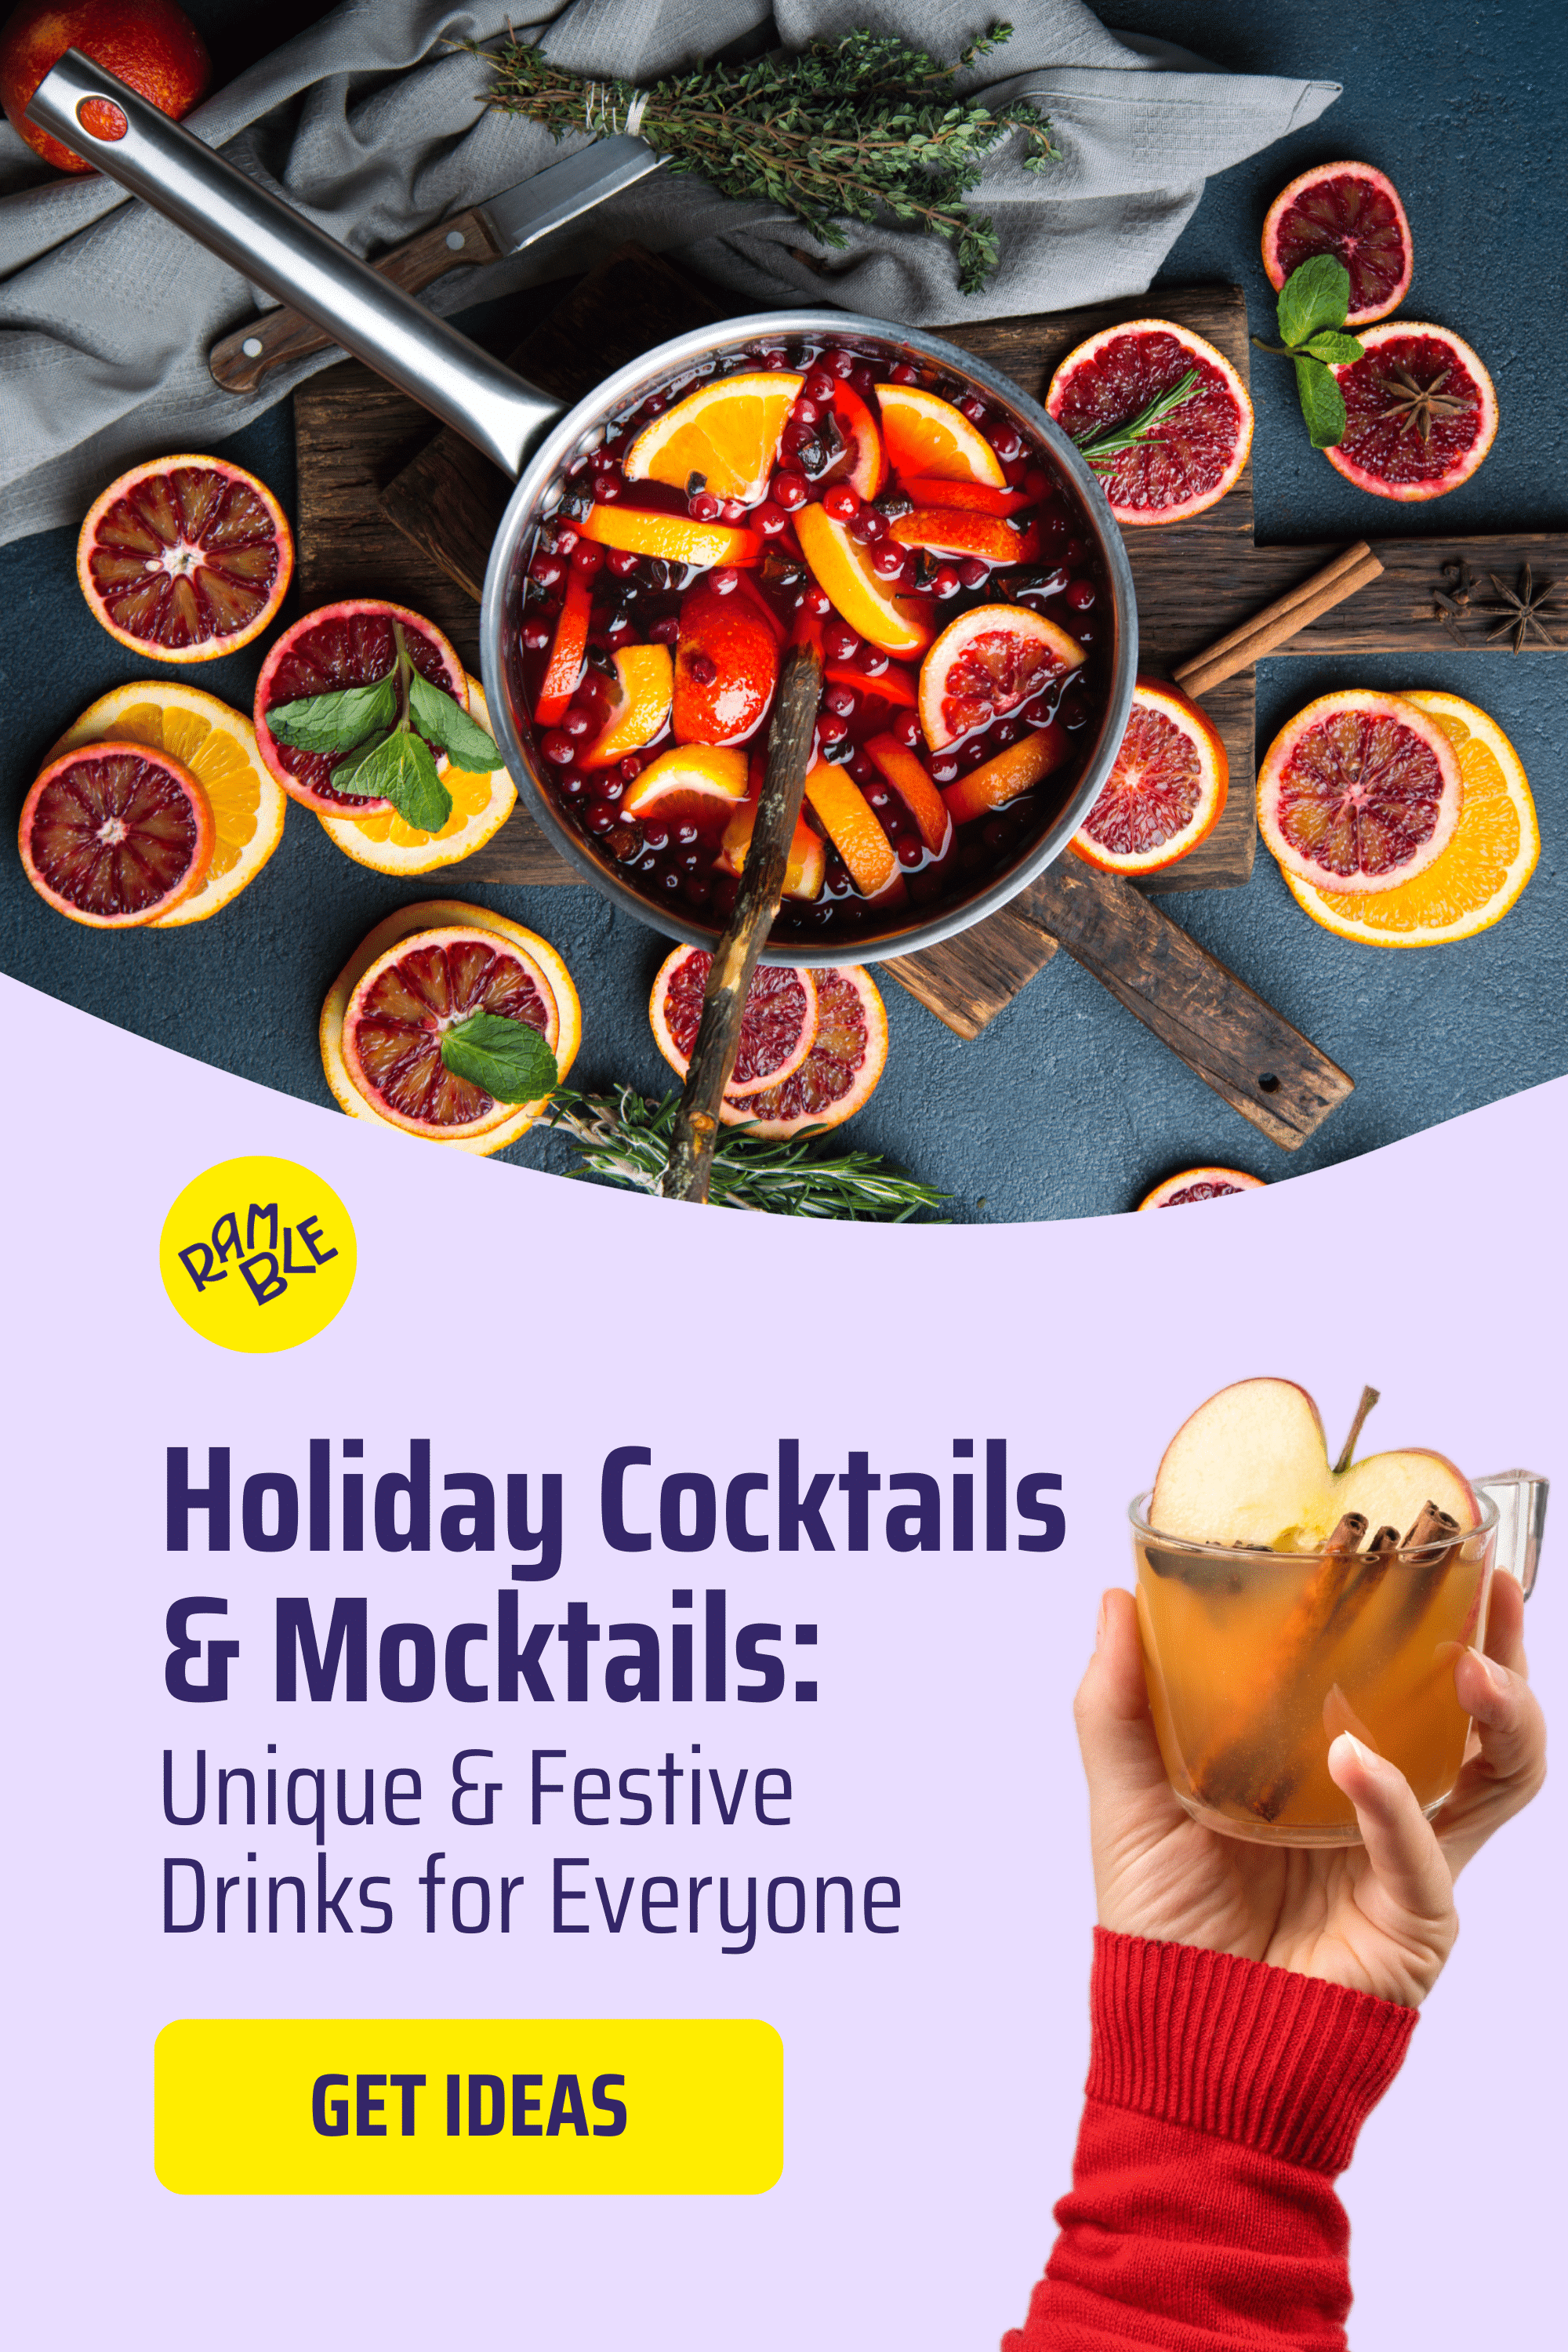 Pinterest—Ramble Gifts: Holiday Cocktails & Mocktails